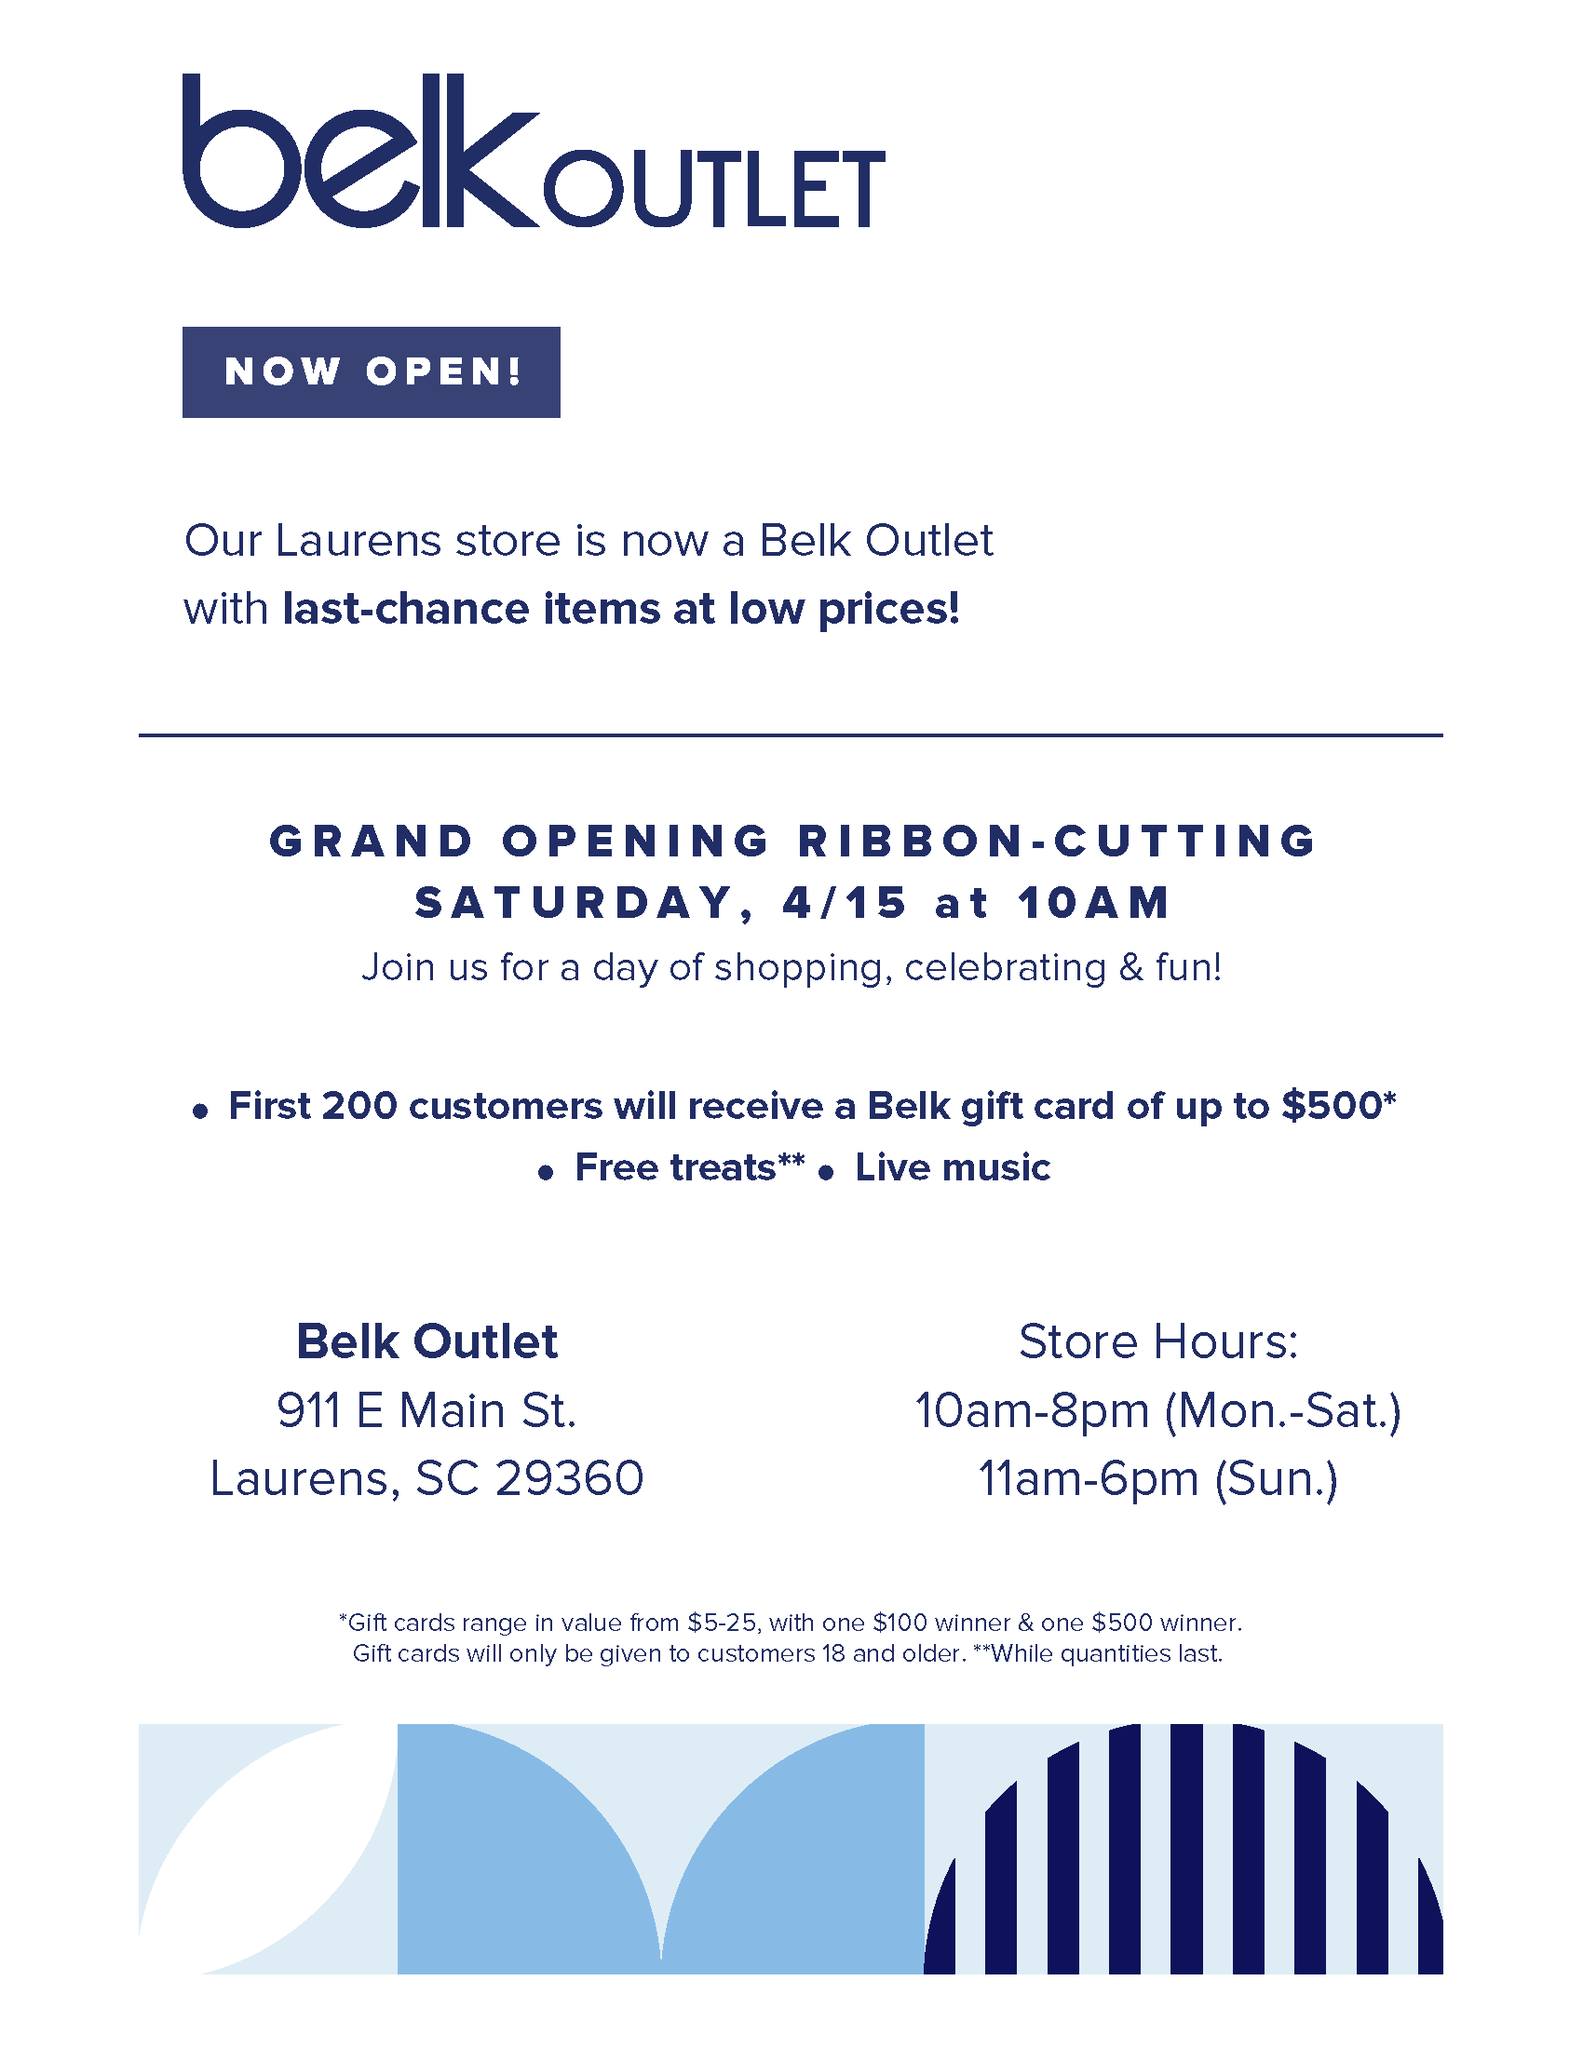 Ribbon Cutting for Belk Outlet - Who's On The Move